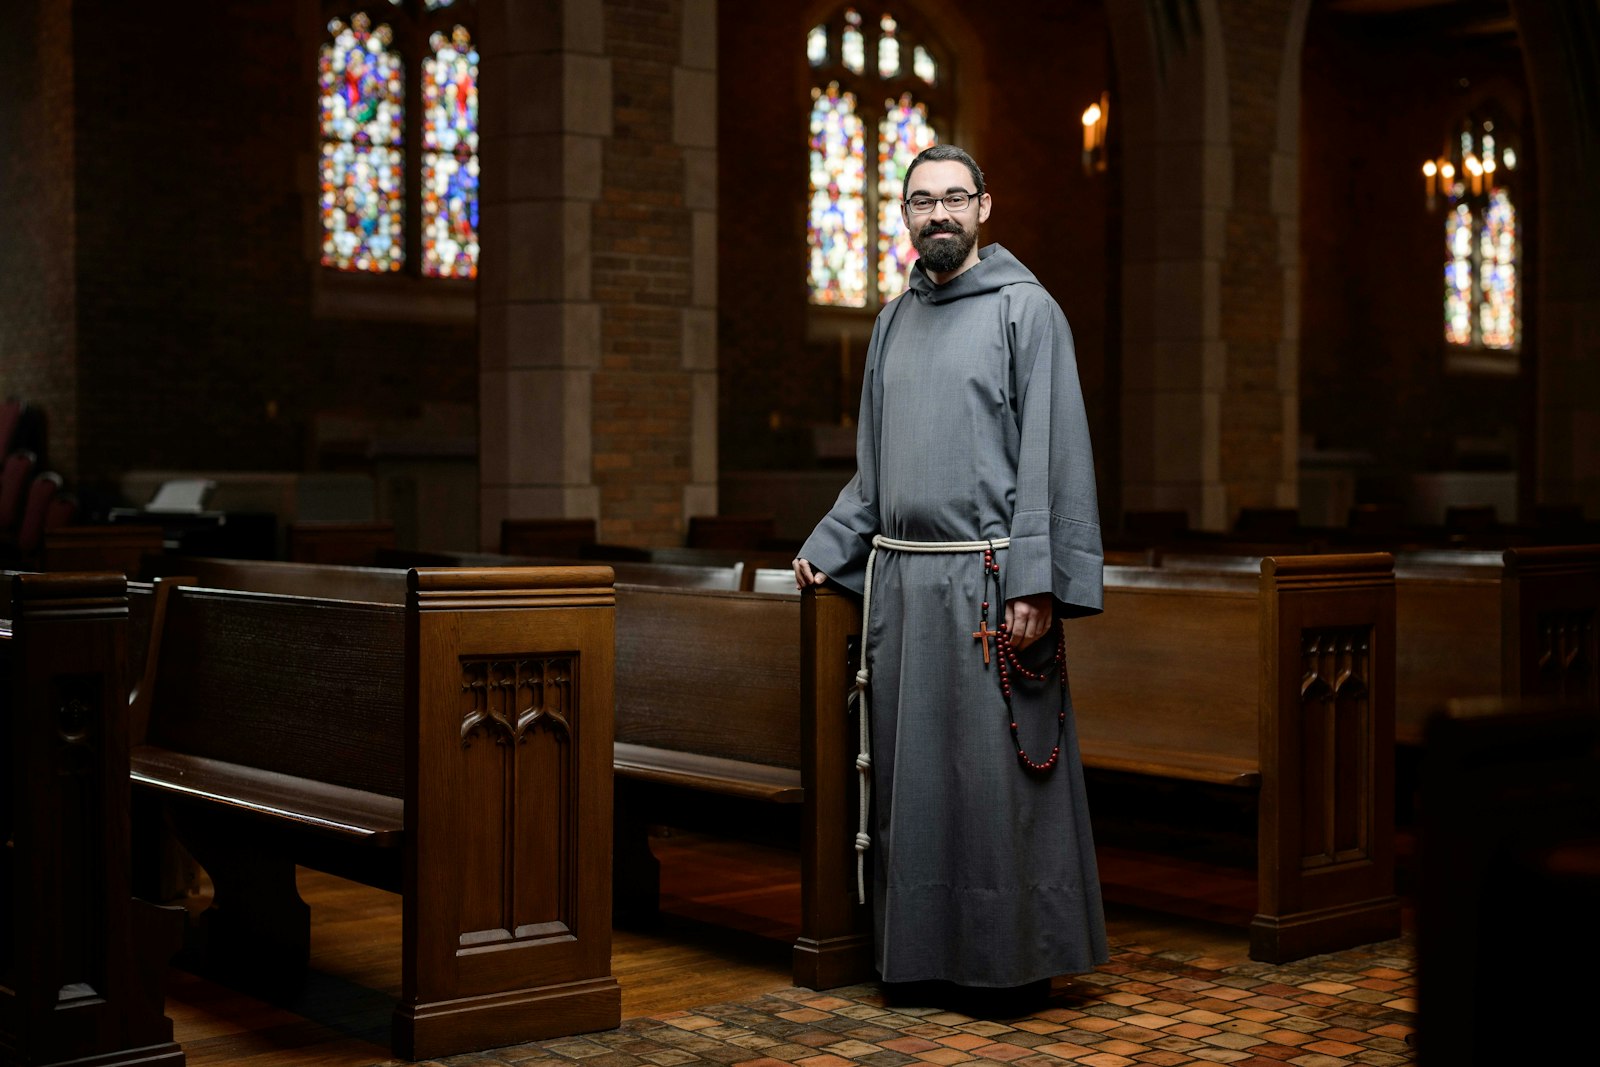 Bro. Elijah DeLello, FHS, will be ordained a transitional deacon for the Franciscan Friars of the Holy Spirit. He currently lives and serves at St. Mary of Redford Parish in Detroit.